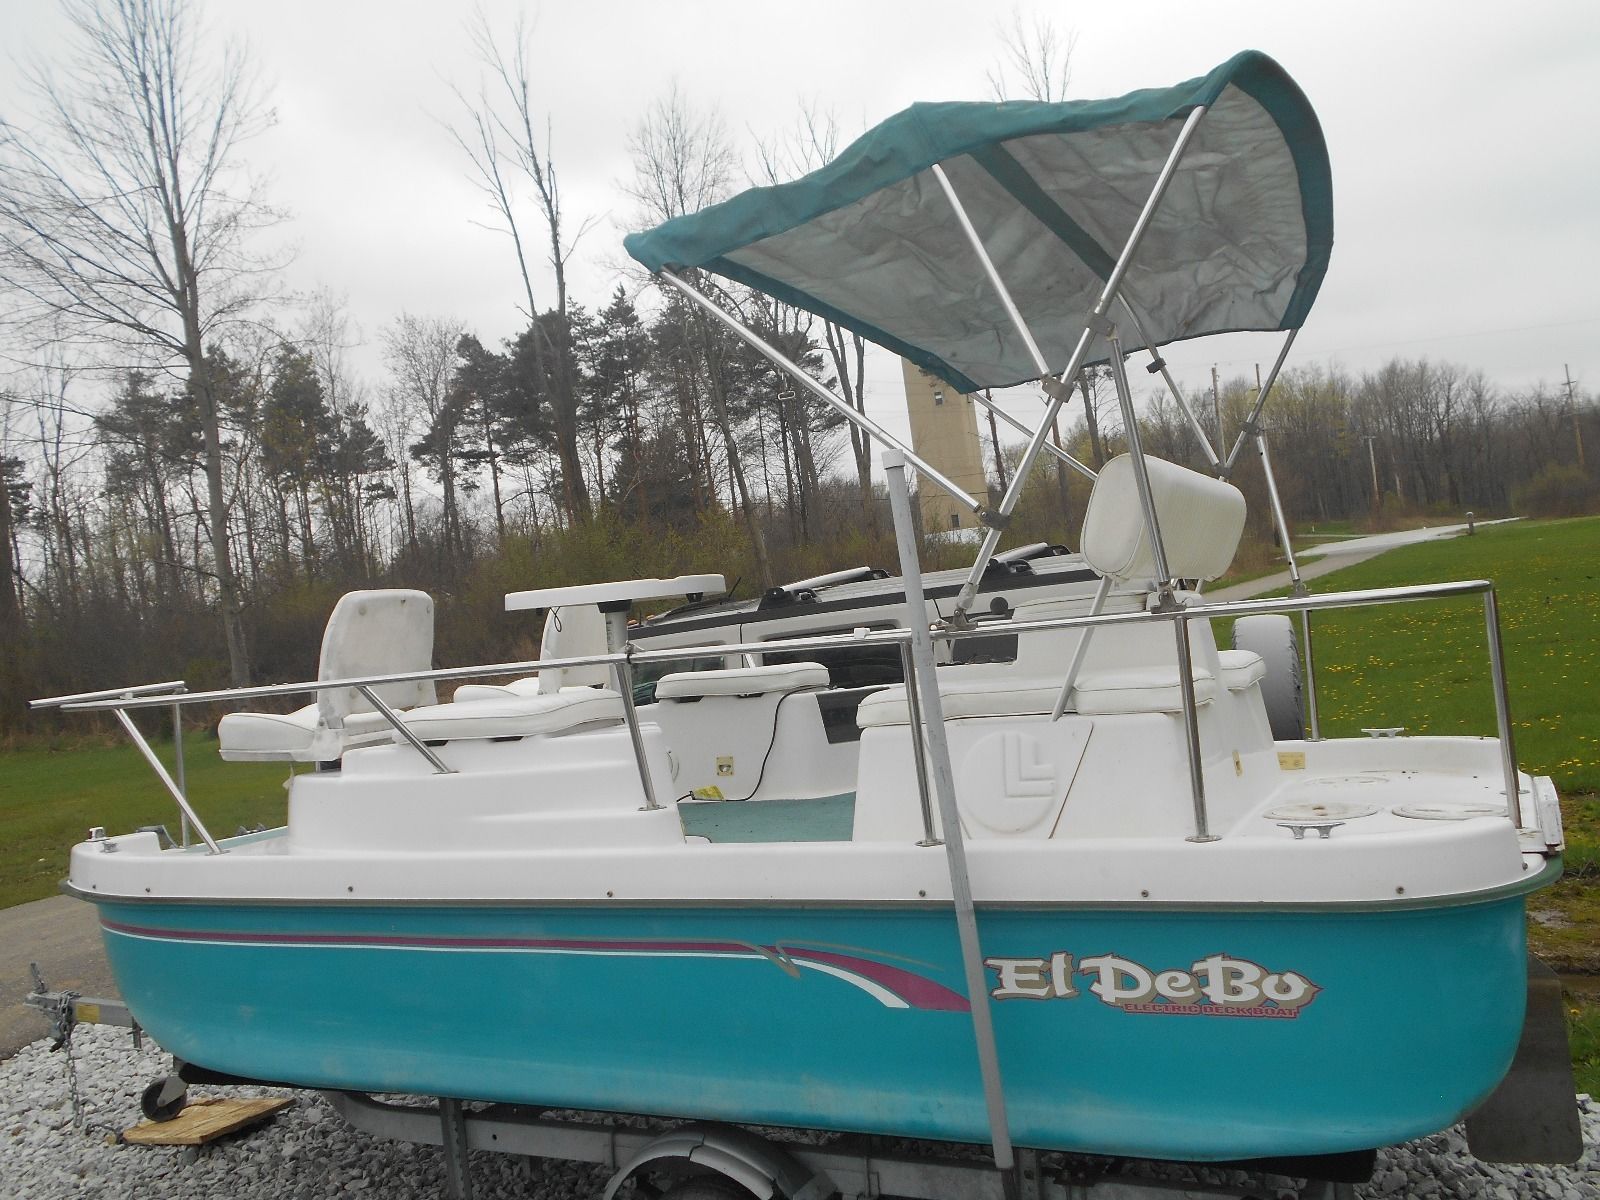 Leisure Eldebo 1997 for sale for $2,750 - Boats-from-USA.com